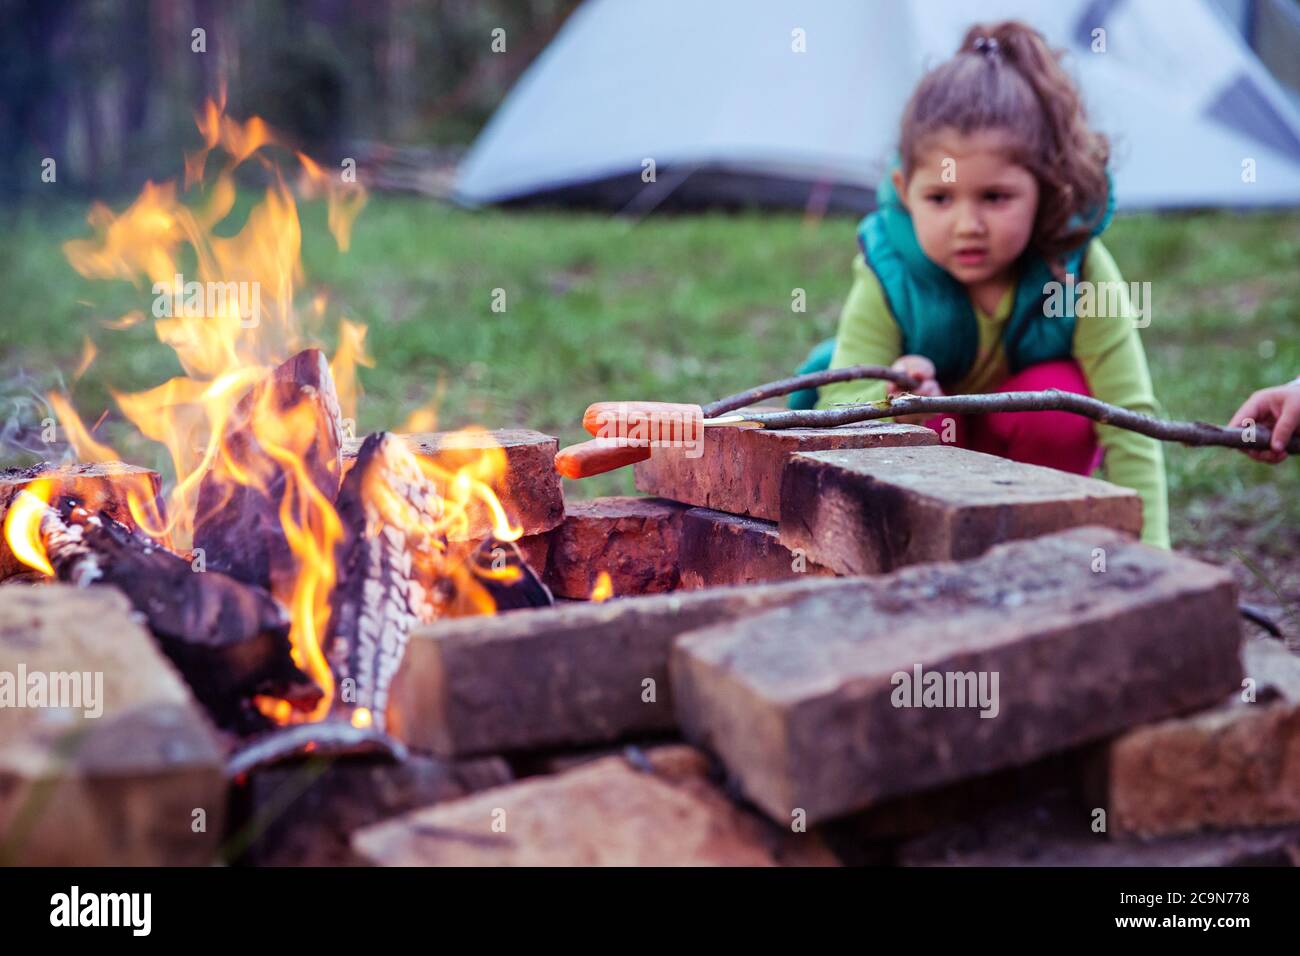 Close up of a young female child, cooking food on a campfire, with camping tent in the background. Stock Photo